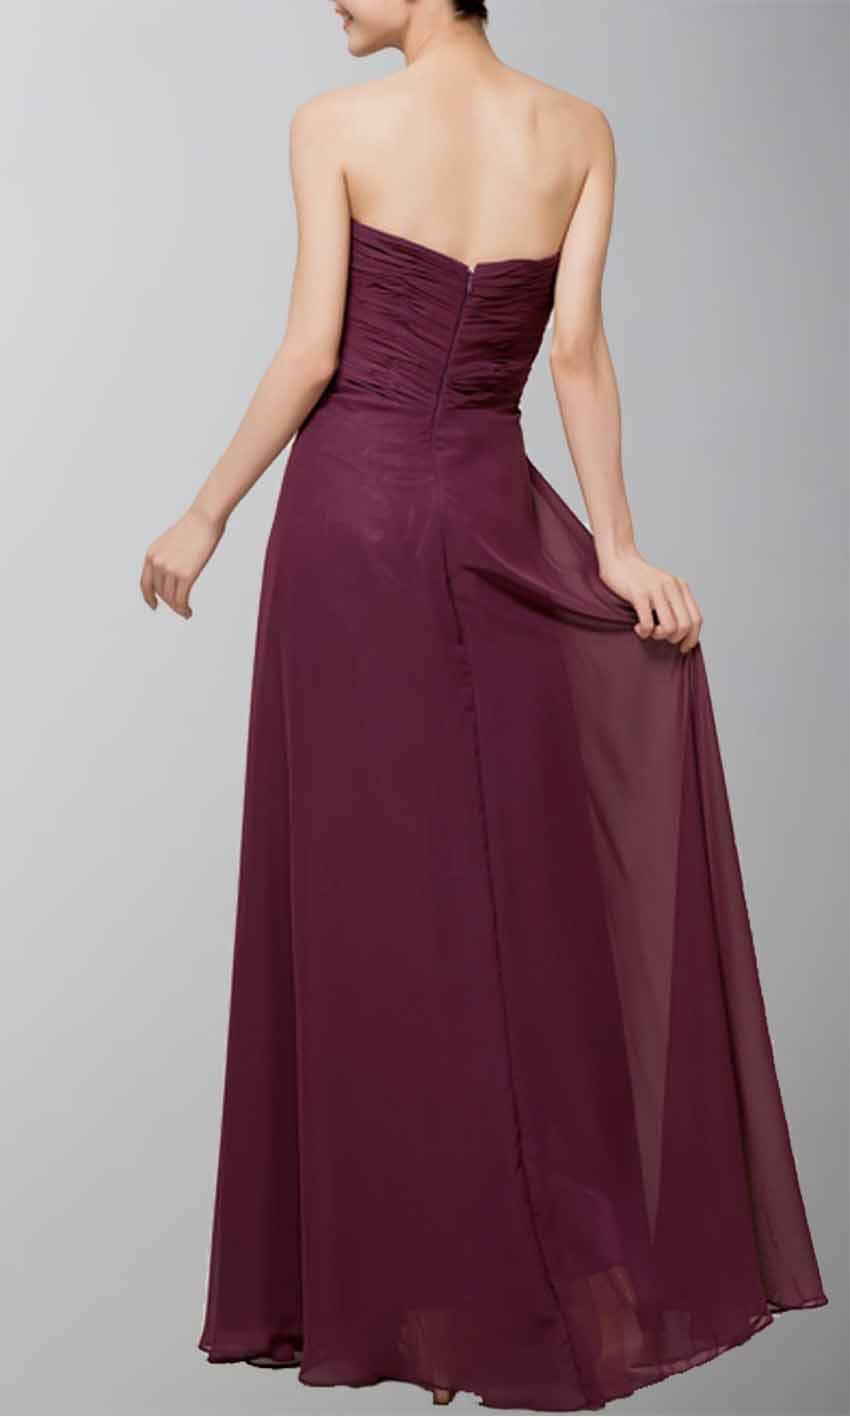 Wedding - Dark Purple Fancy Chiffon Bridesmaid Prom Dress KSP060 [KSP060] - £83.00 : Cheap Prom Dresses Uk, Bridesmaid Dresses, 2014 Prom & Evening Dresses, Look for cheap elegant prom dresses 2014, cocktail gowns, or dresses for special occasions? kissprom.co.uk o